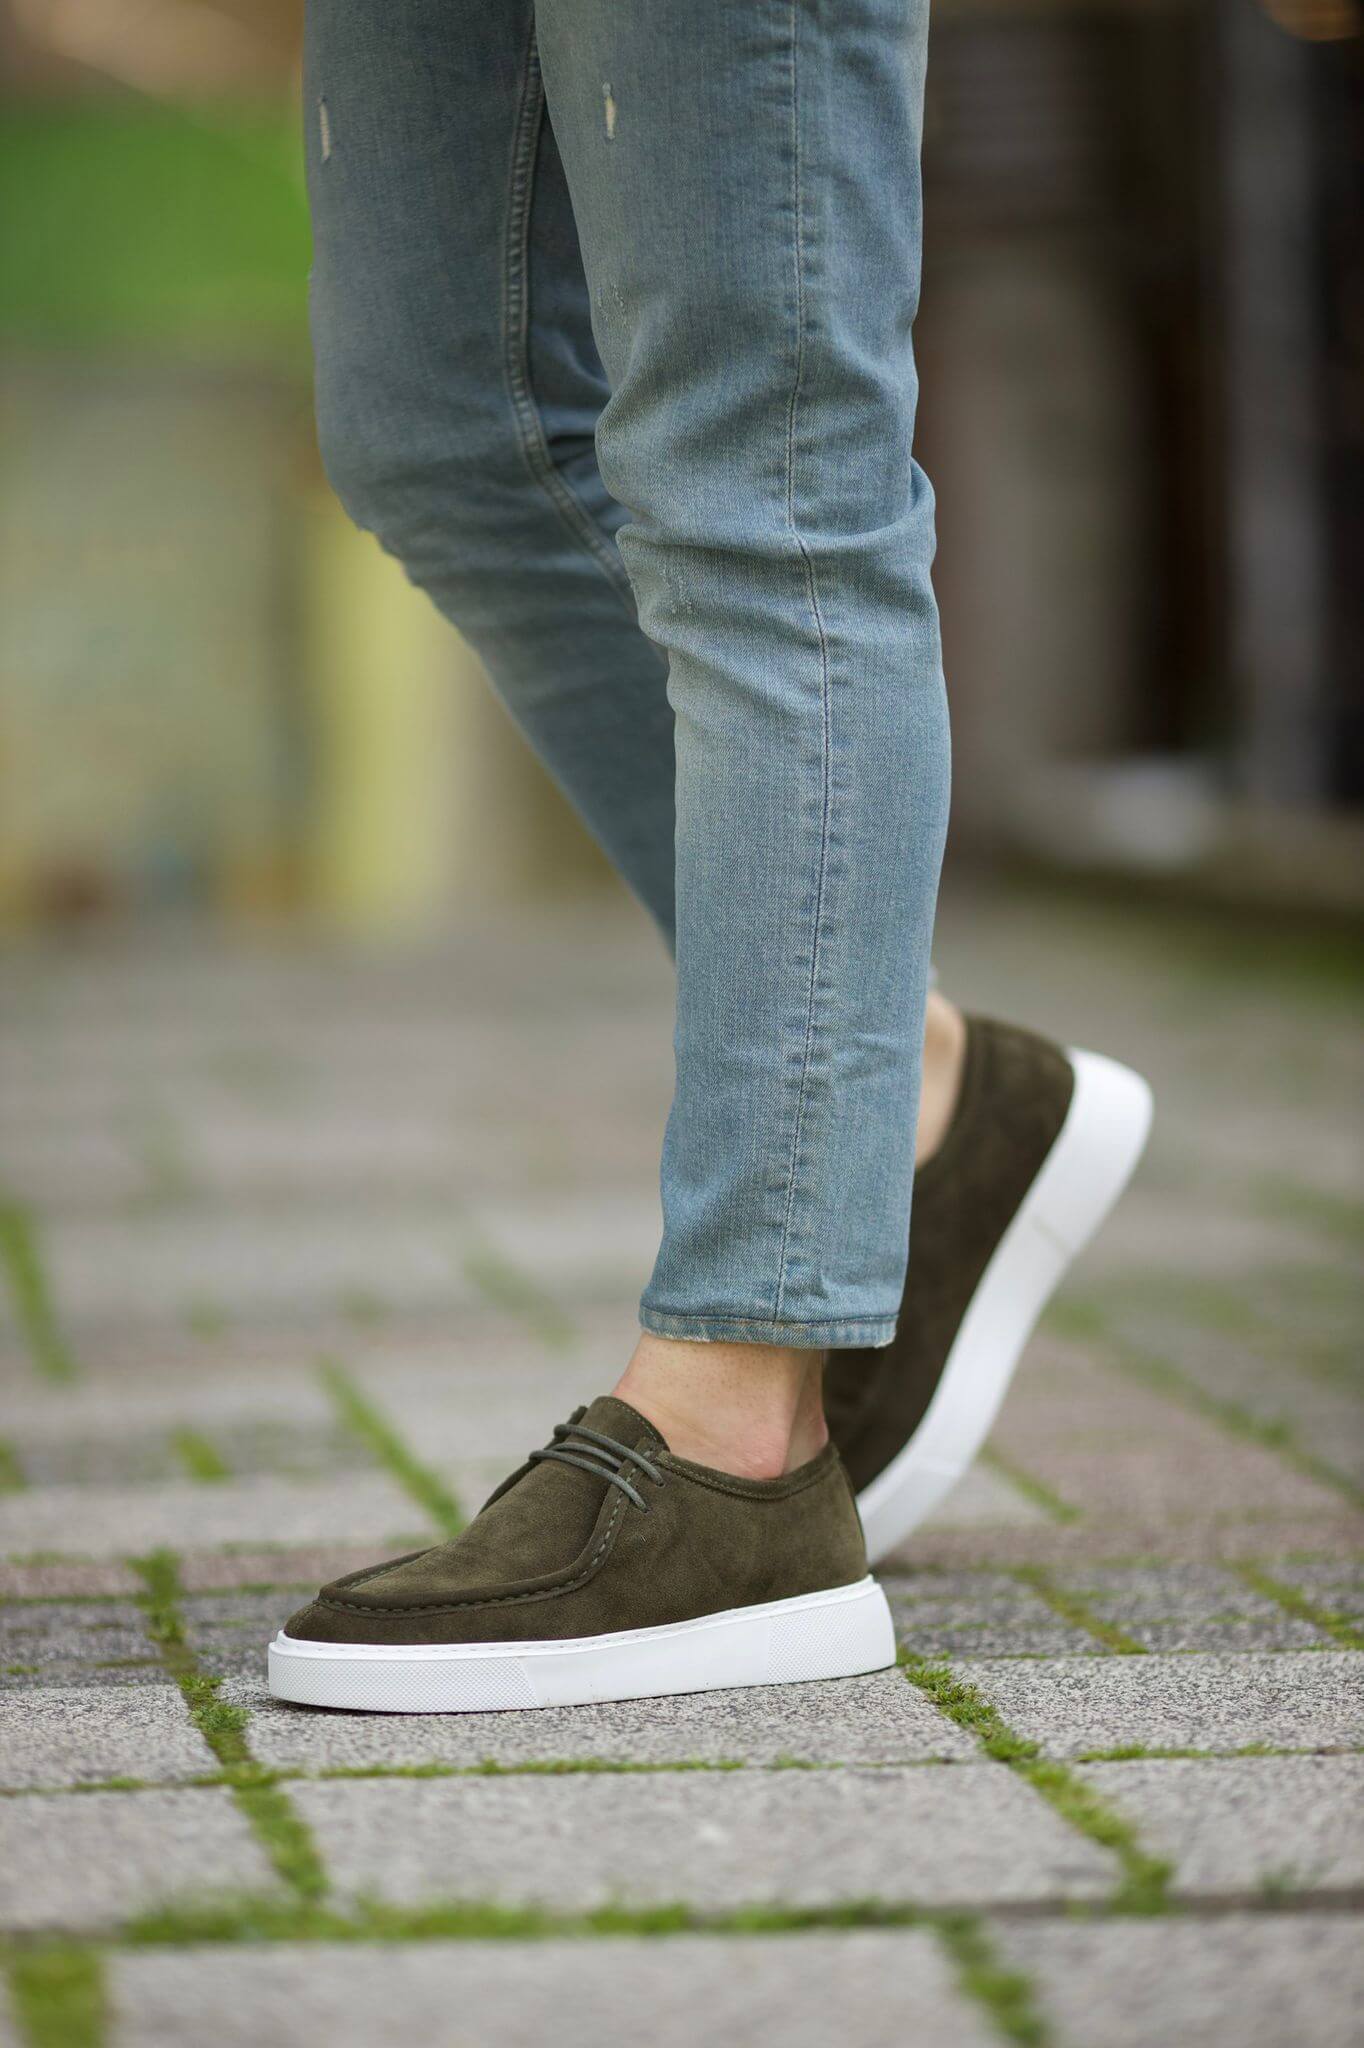 A Khaki Casual Detailed Lace Up on display.